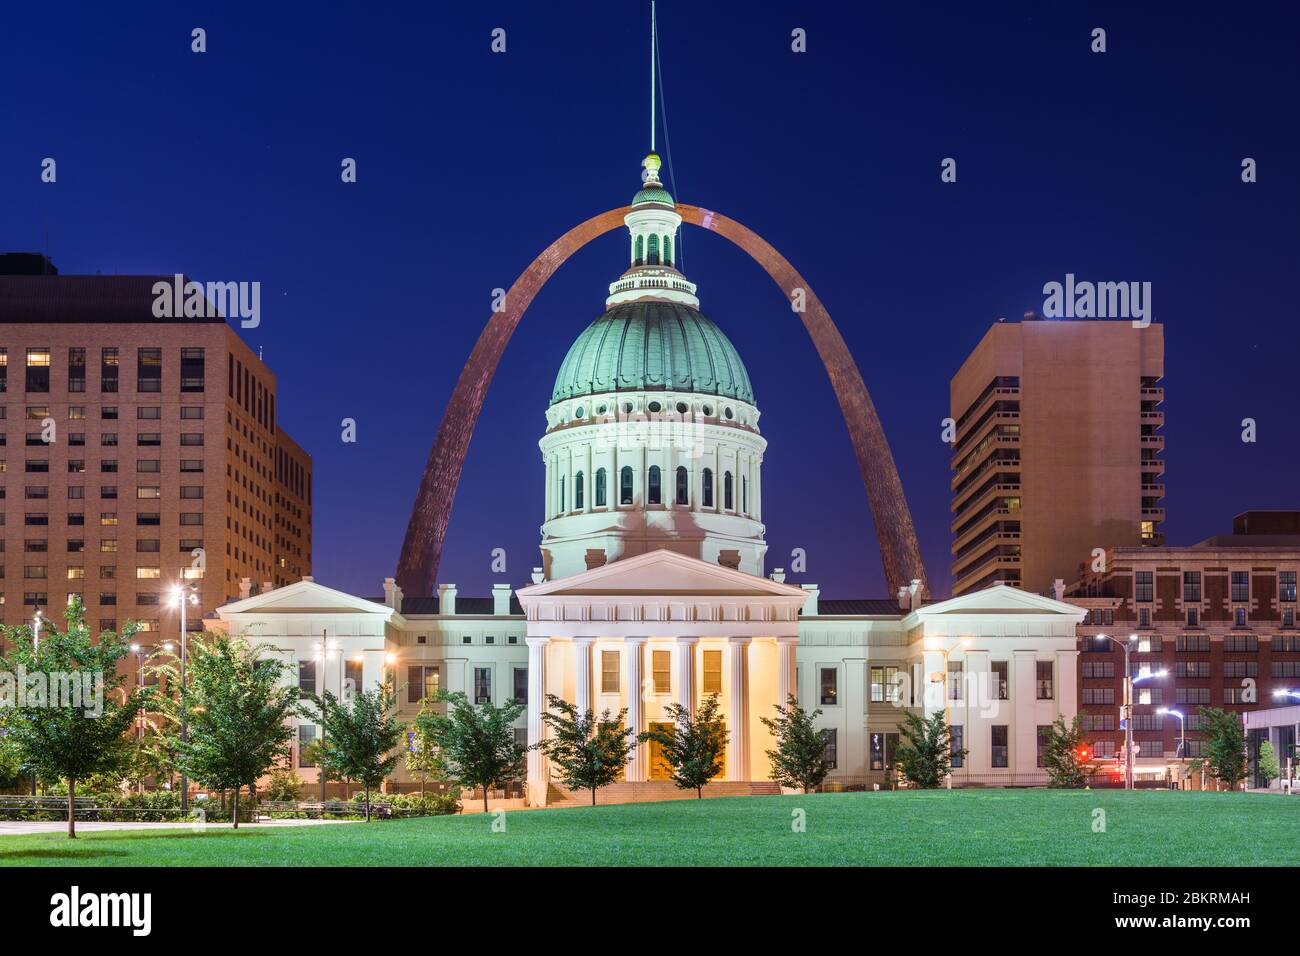 St. Louis, Missouri, USA  park and citycape with the old courthouse at night. Stock Photo